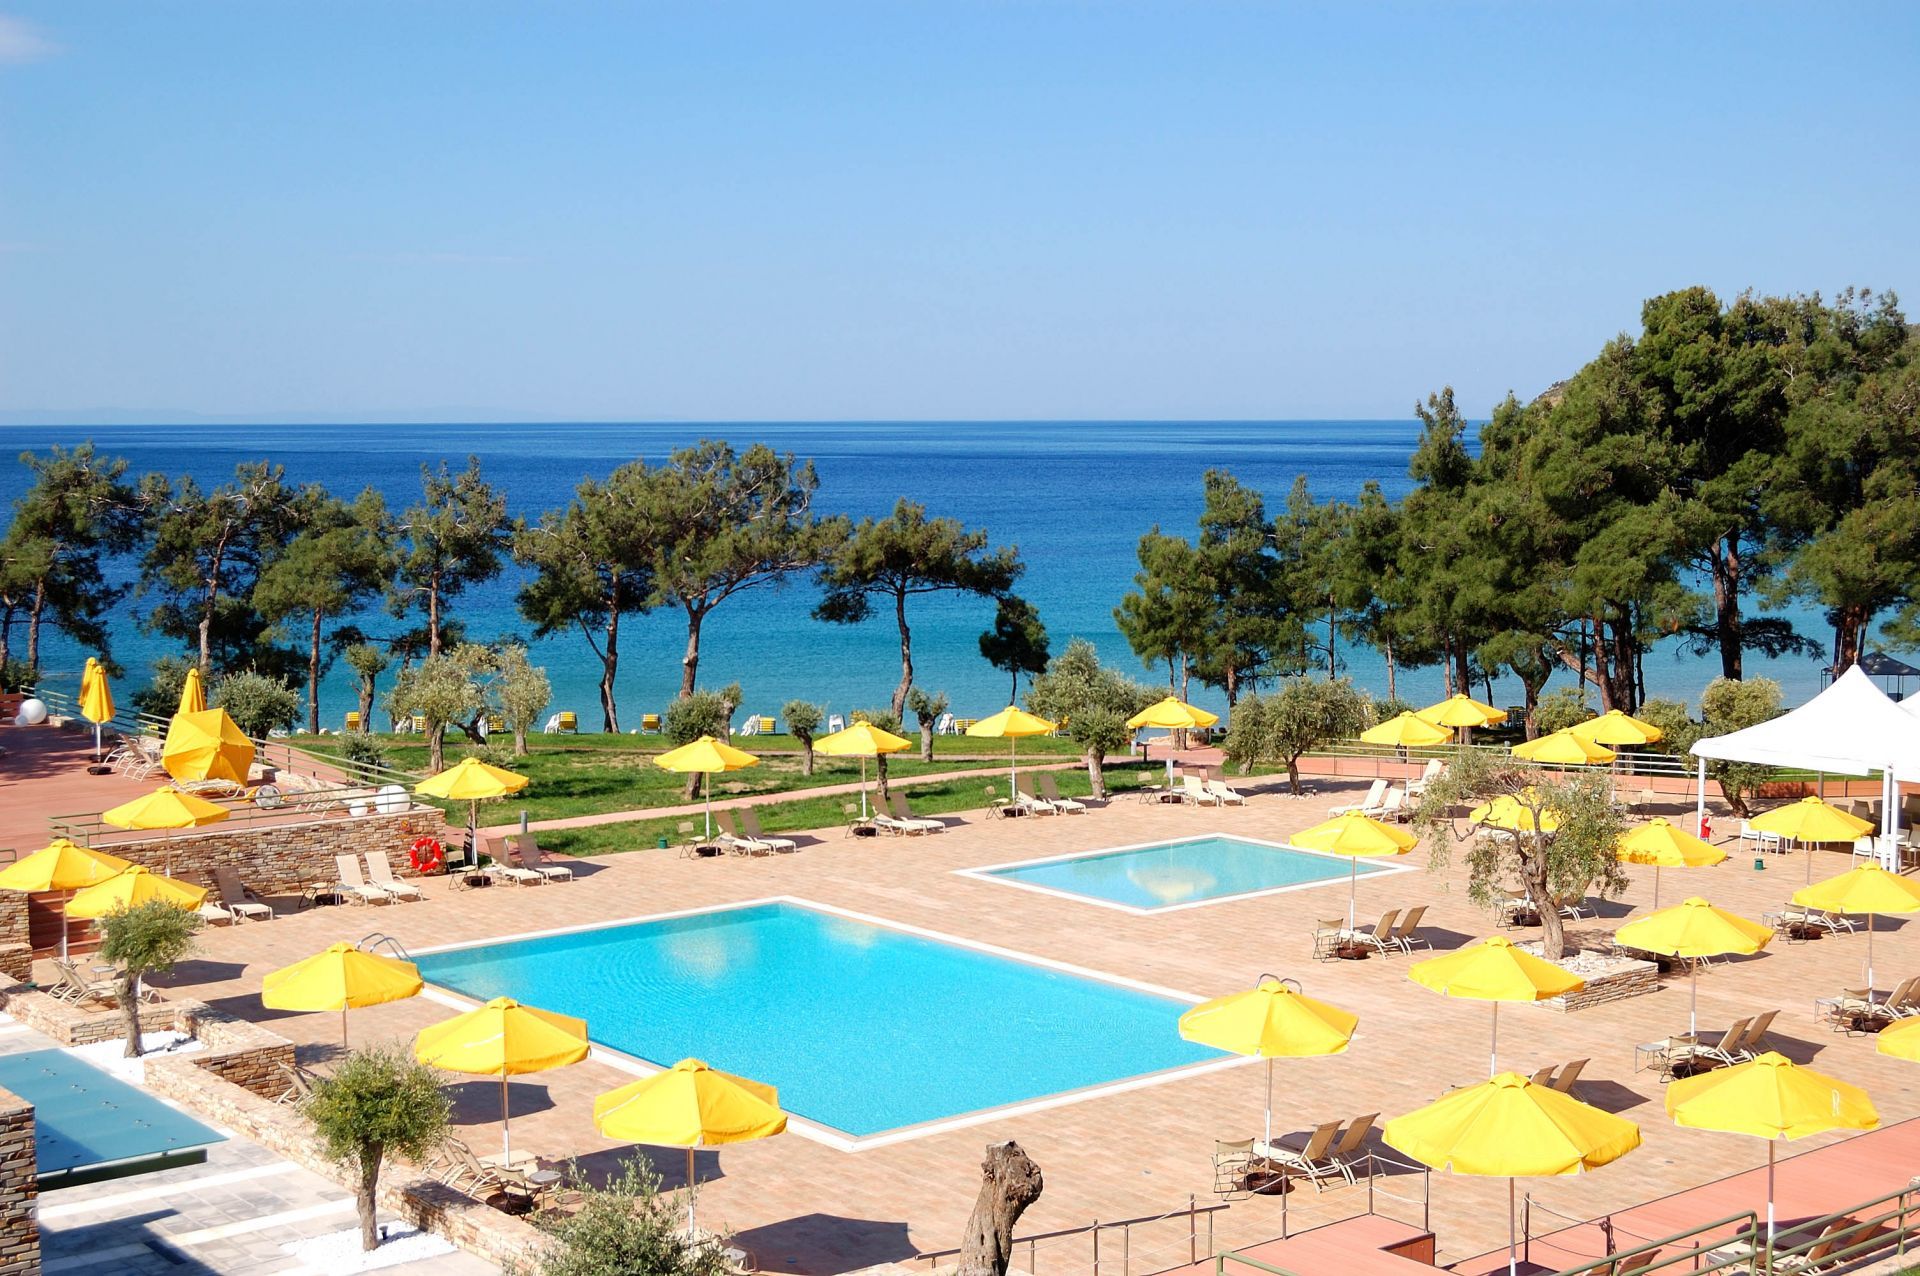 Accommodation and hotels in Thassos